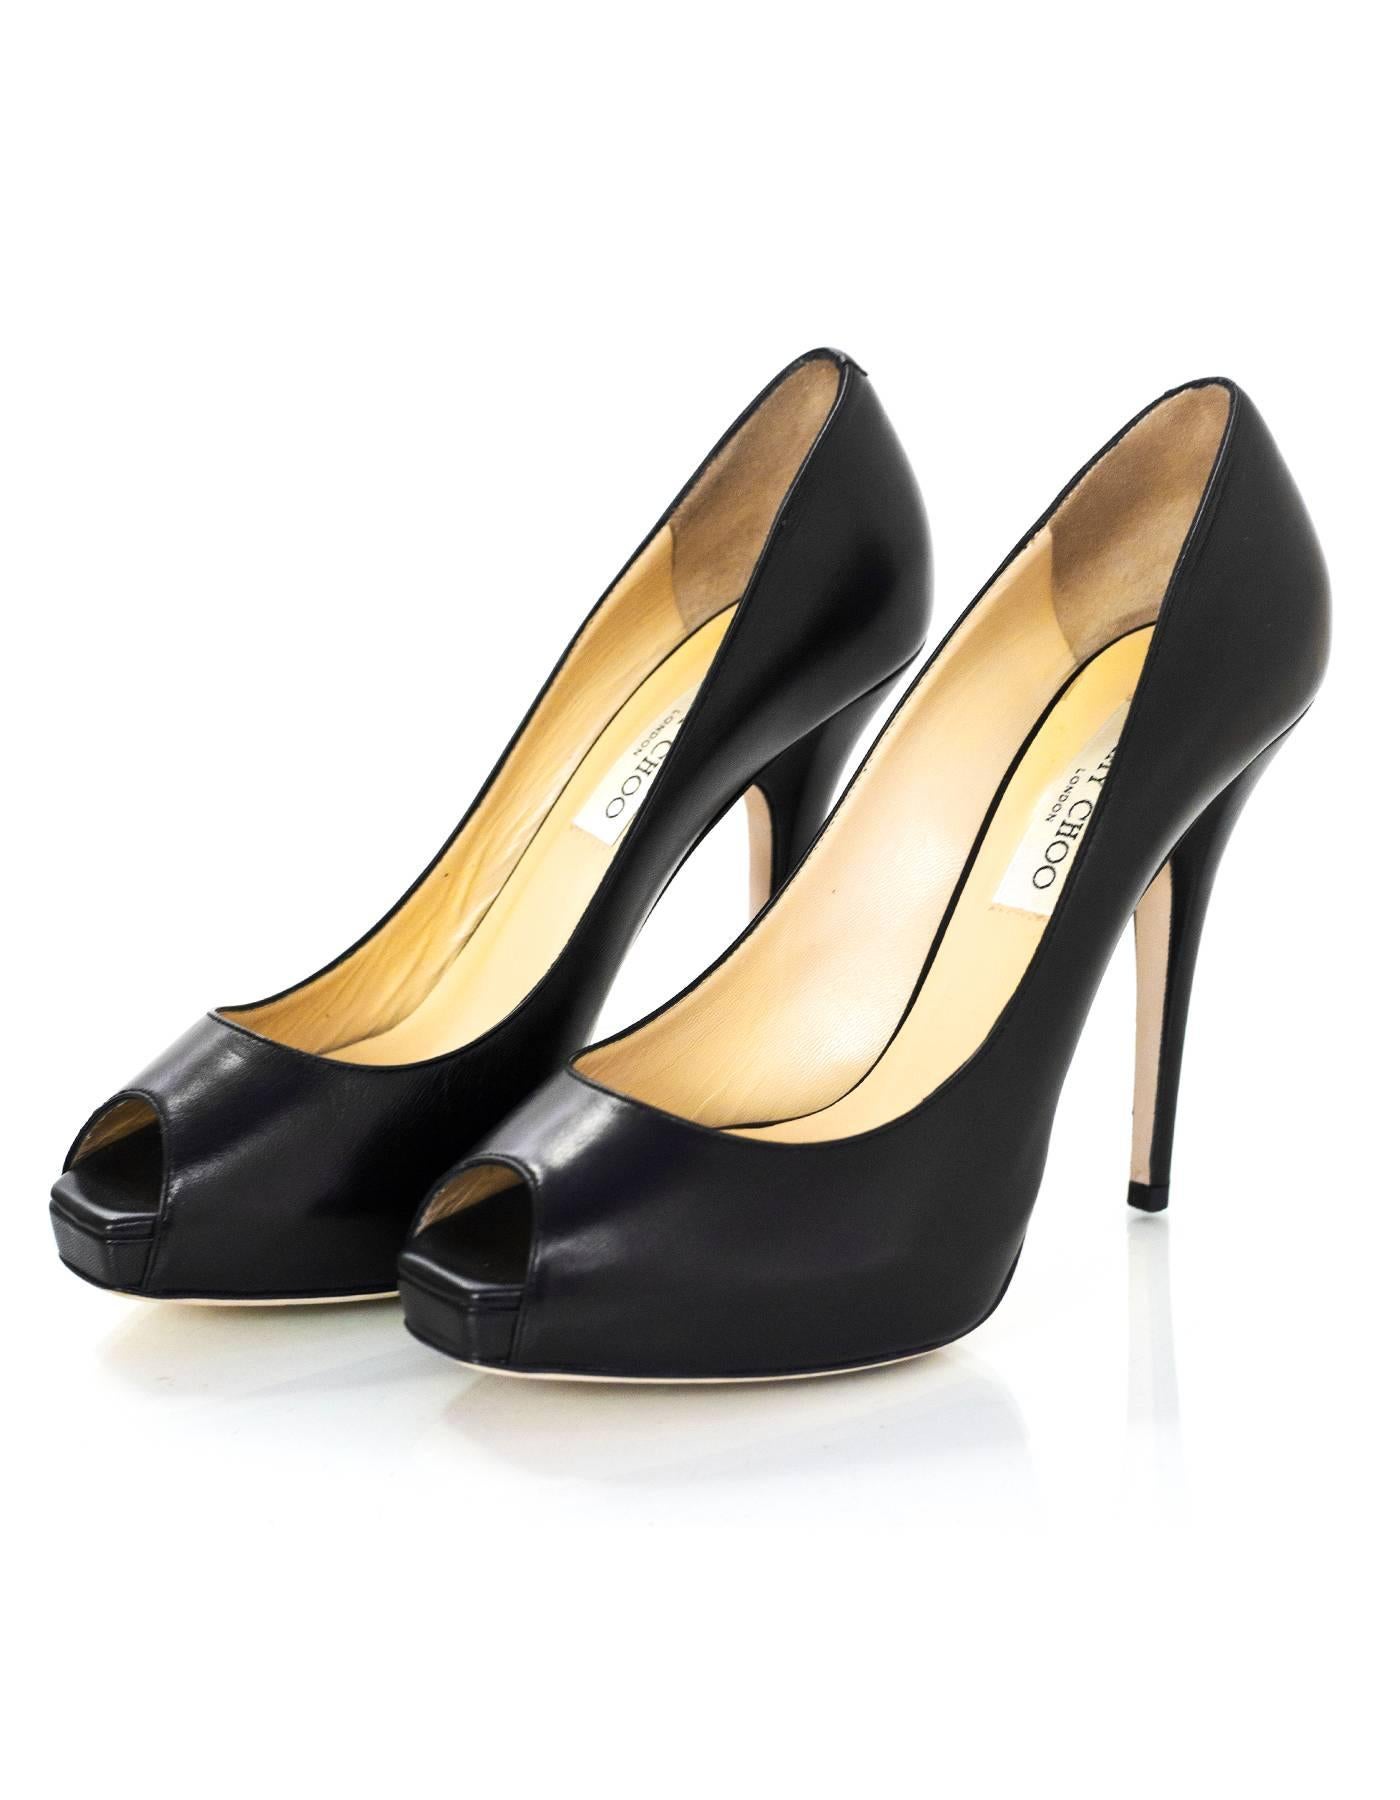 Jimmy Choo Black Leather Peep-Toe Comet Pumps Sz 39

Made In: Italy
Color: Black
Materials: Leather
Closure/Opening: Slide on
Sole Stamp: Jimmy Choo London Made in Italy 39
Retail Price: $695 + tax
Overall Condition: Excellent pre-owned condition